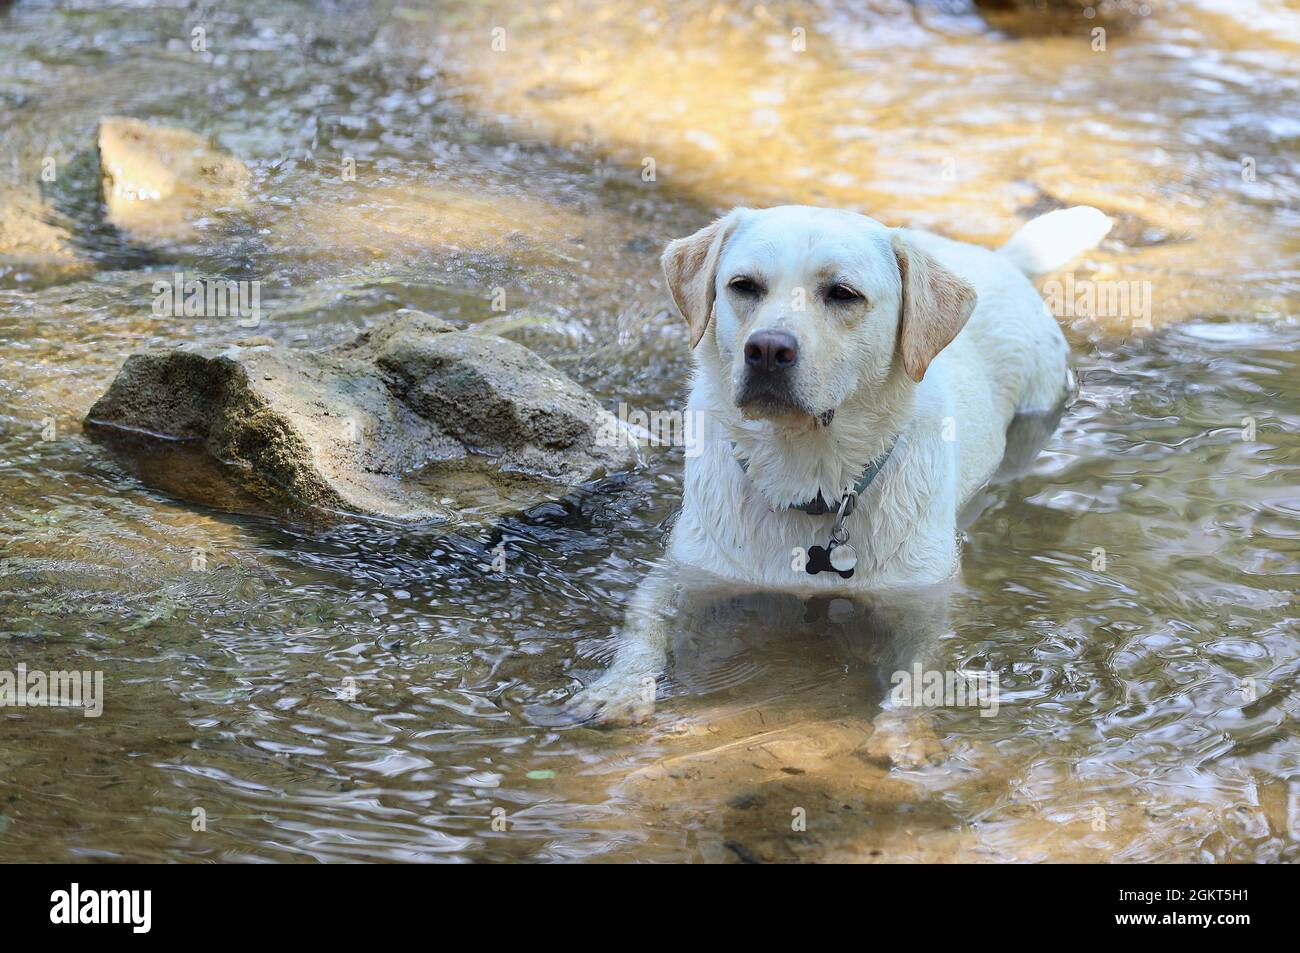 A golden labador lays in shallow water of a creeek to cool off from the summer heat. Stock Photo